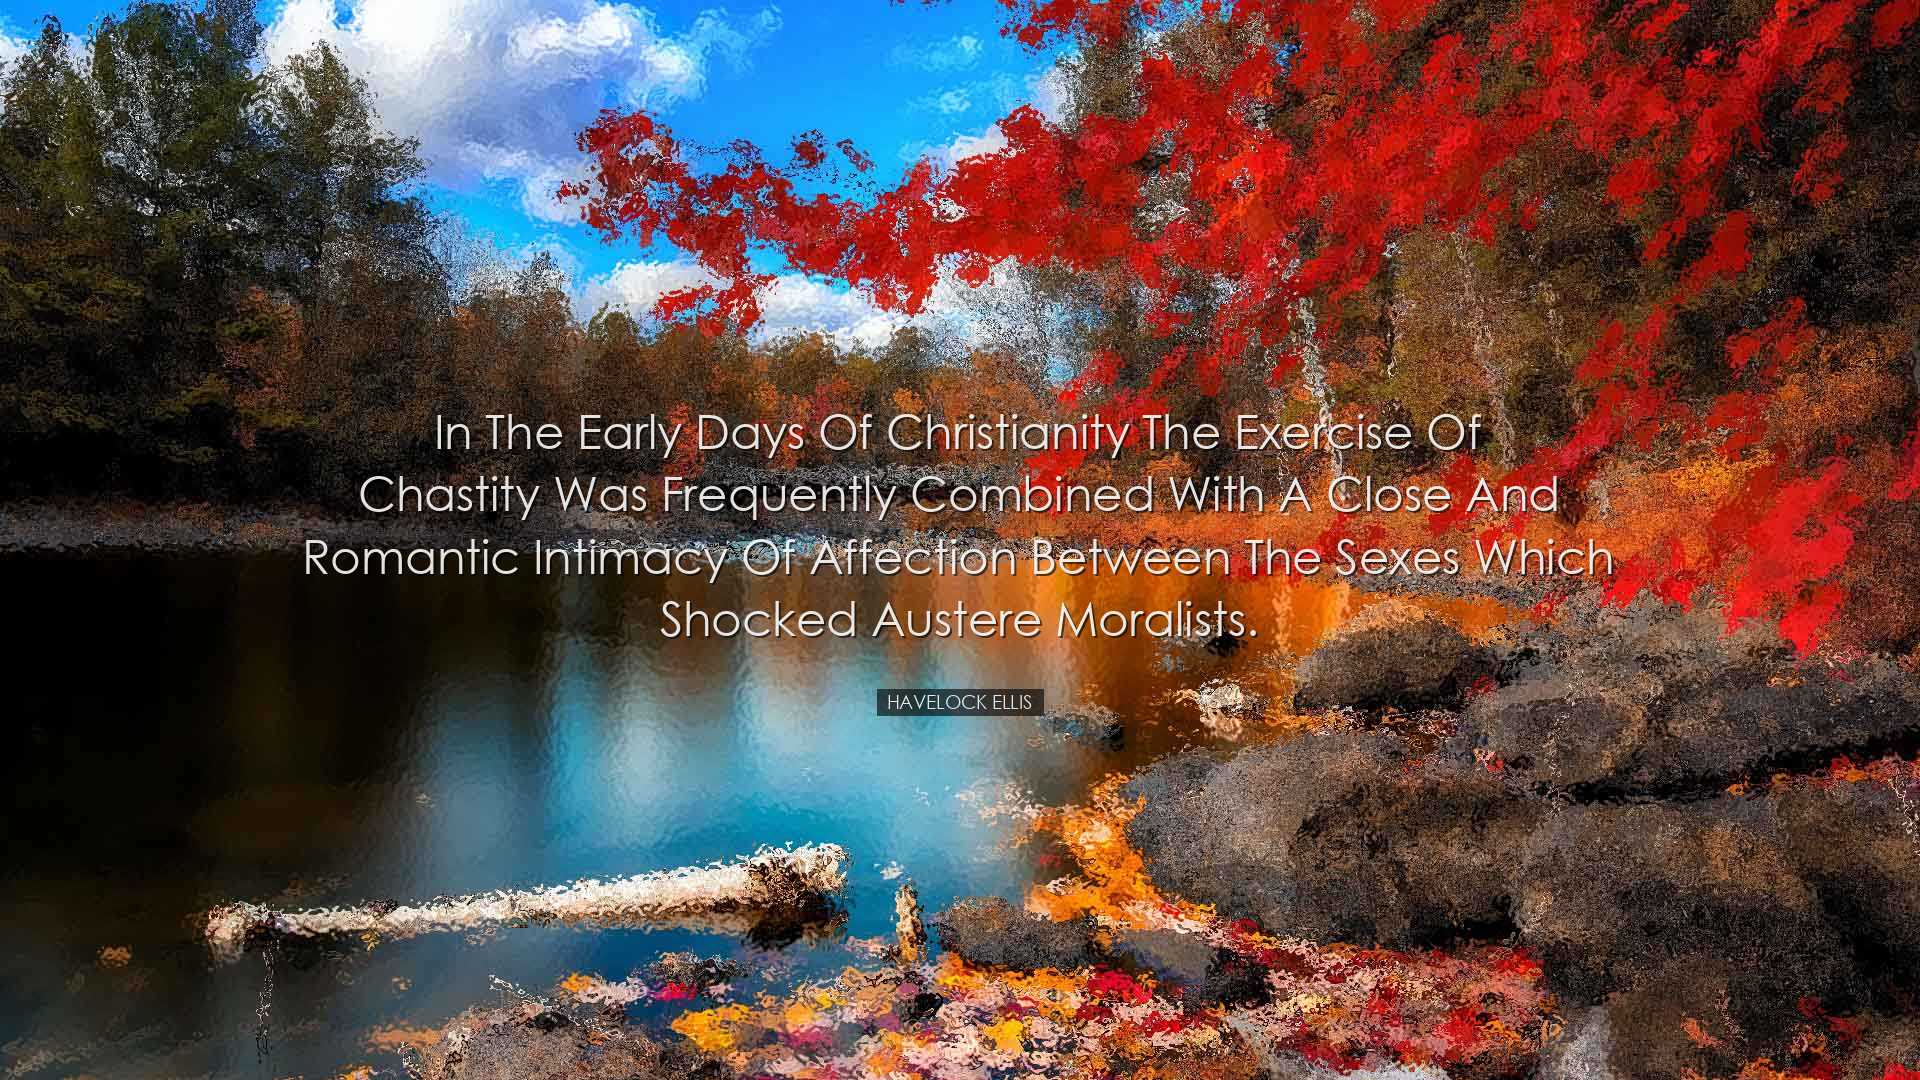 In the early days of Christianity the exercise of chastity was fre